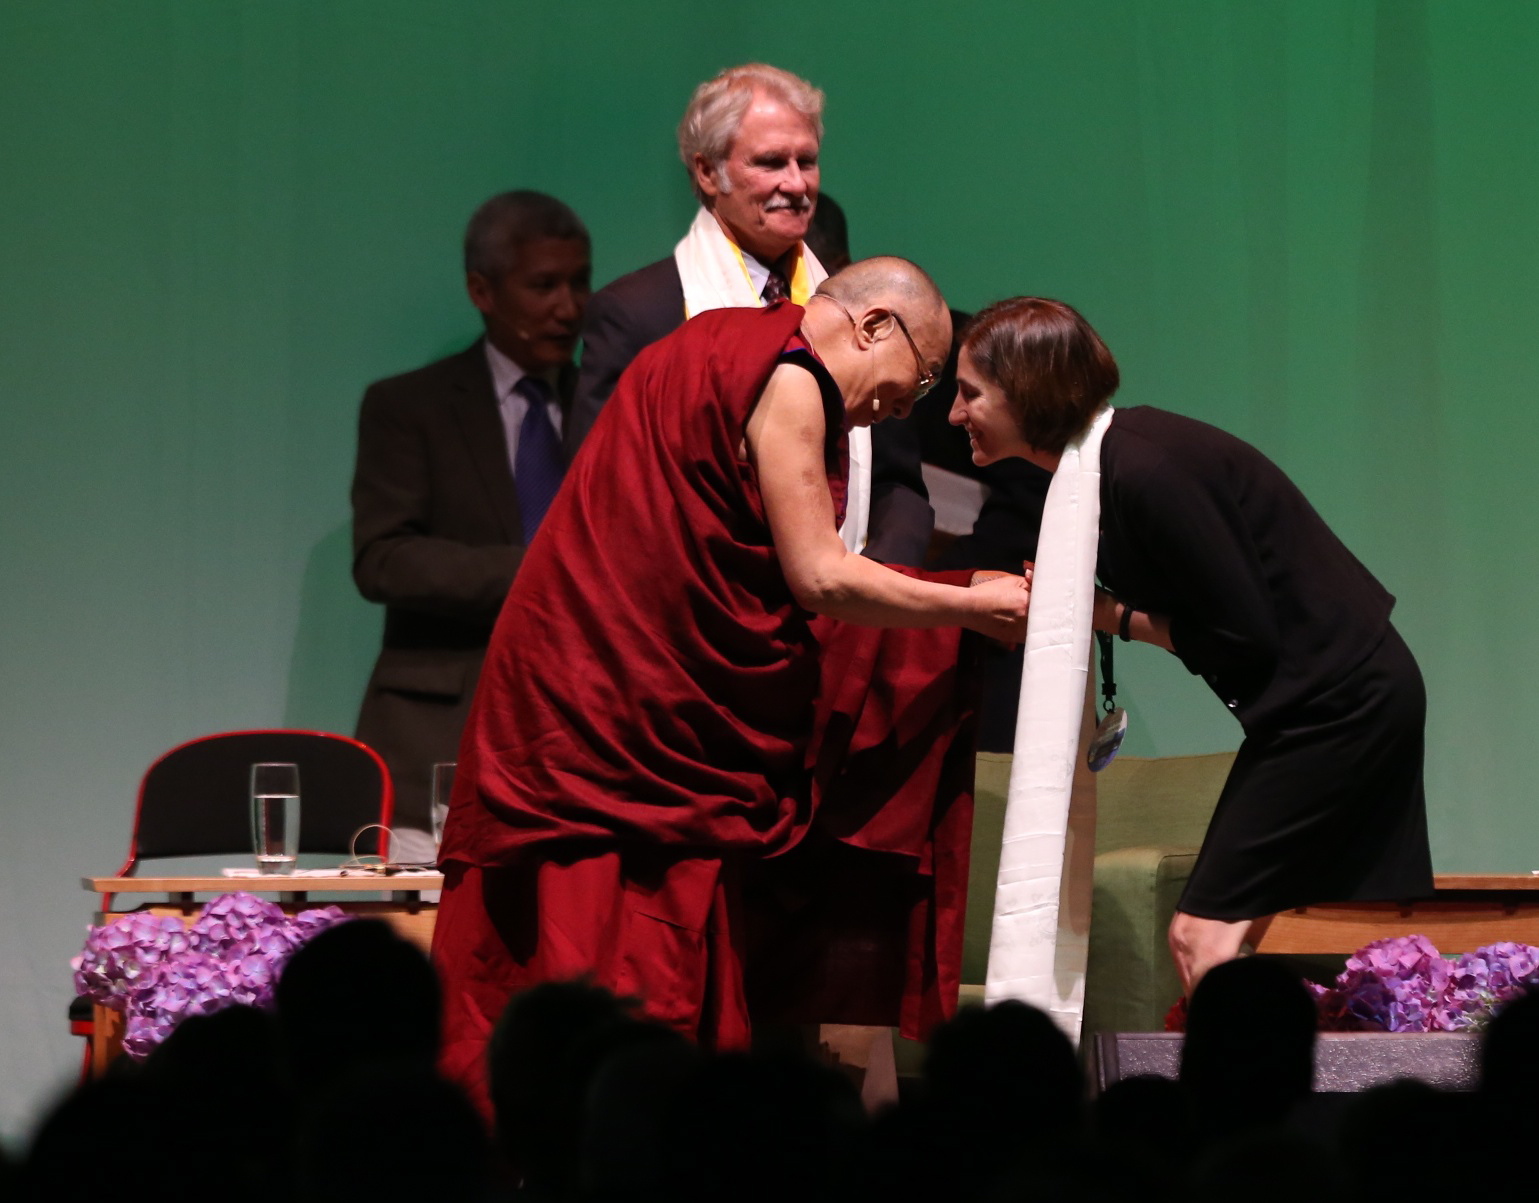 The Dalai Lama presents a welcome scarf to Andrea Durbin, executive director of the Oregon Environmental Council, during His Holiness the Dalai Lama Environmental Summit on &quot;Universal Responsibility and the Global Environment&quot; at Veterans Memorial Coliseum, Saturday in Portland.